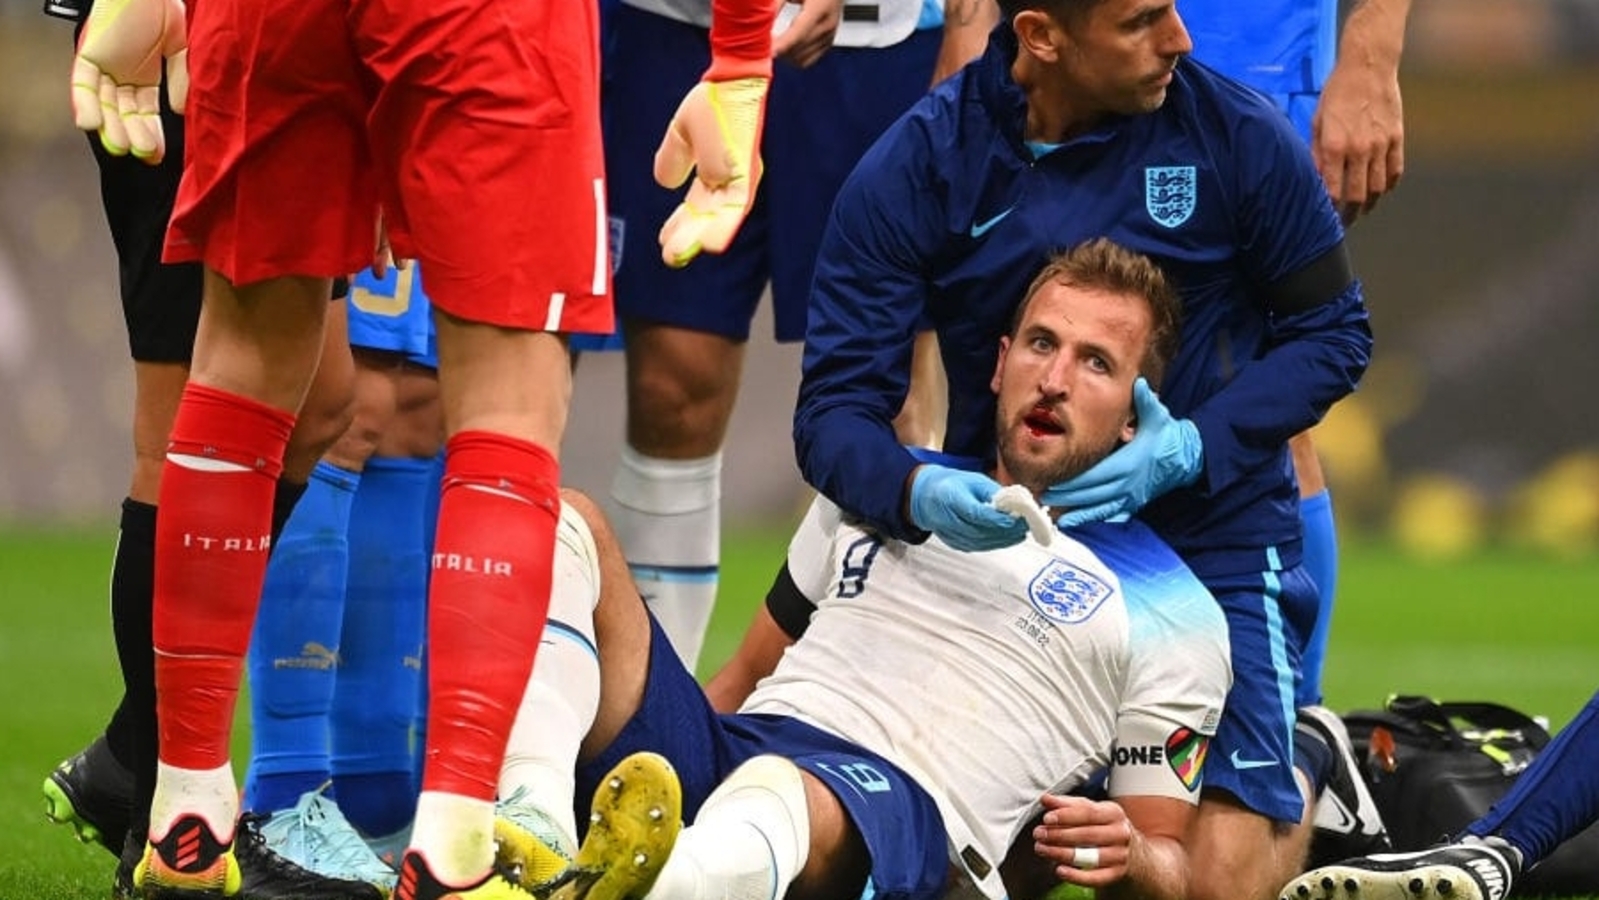 harry-kane-suffers-horrific-injury-with-blood-pouring-from-mouth-during-england-s-1-0-nations-league-defeat-vs-italy